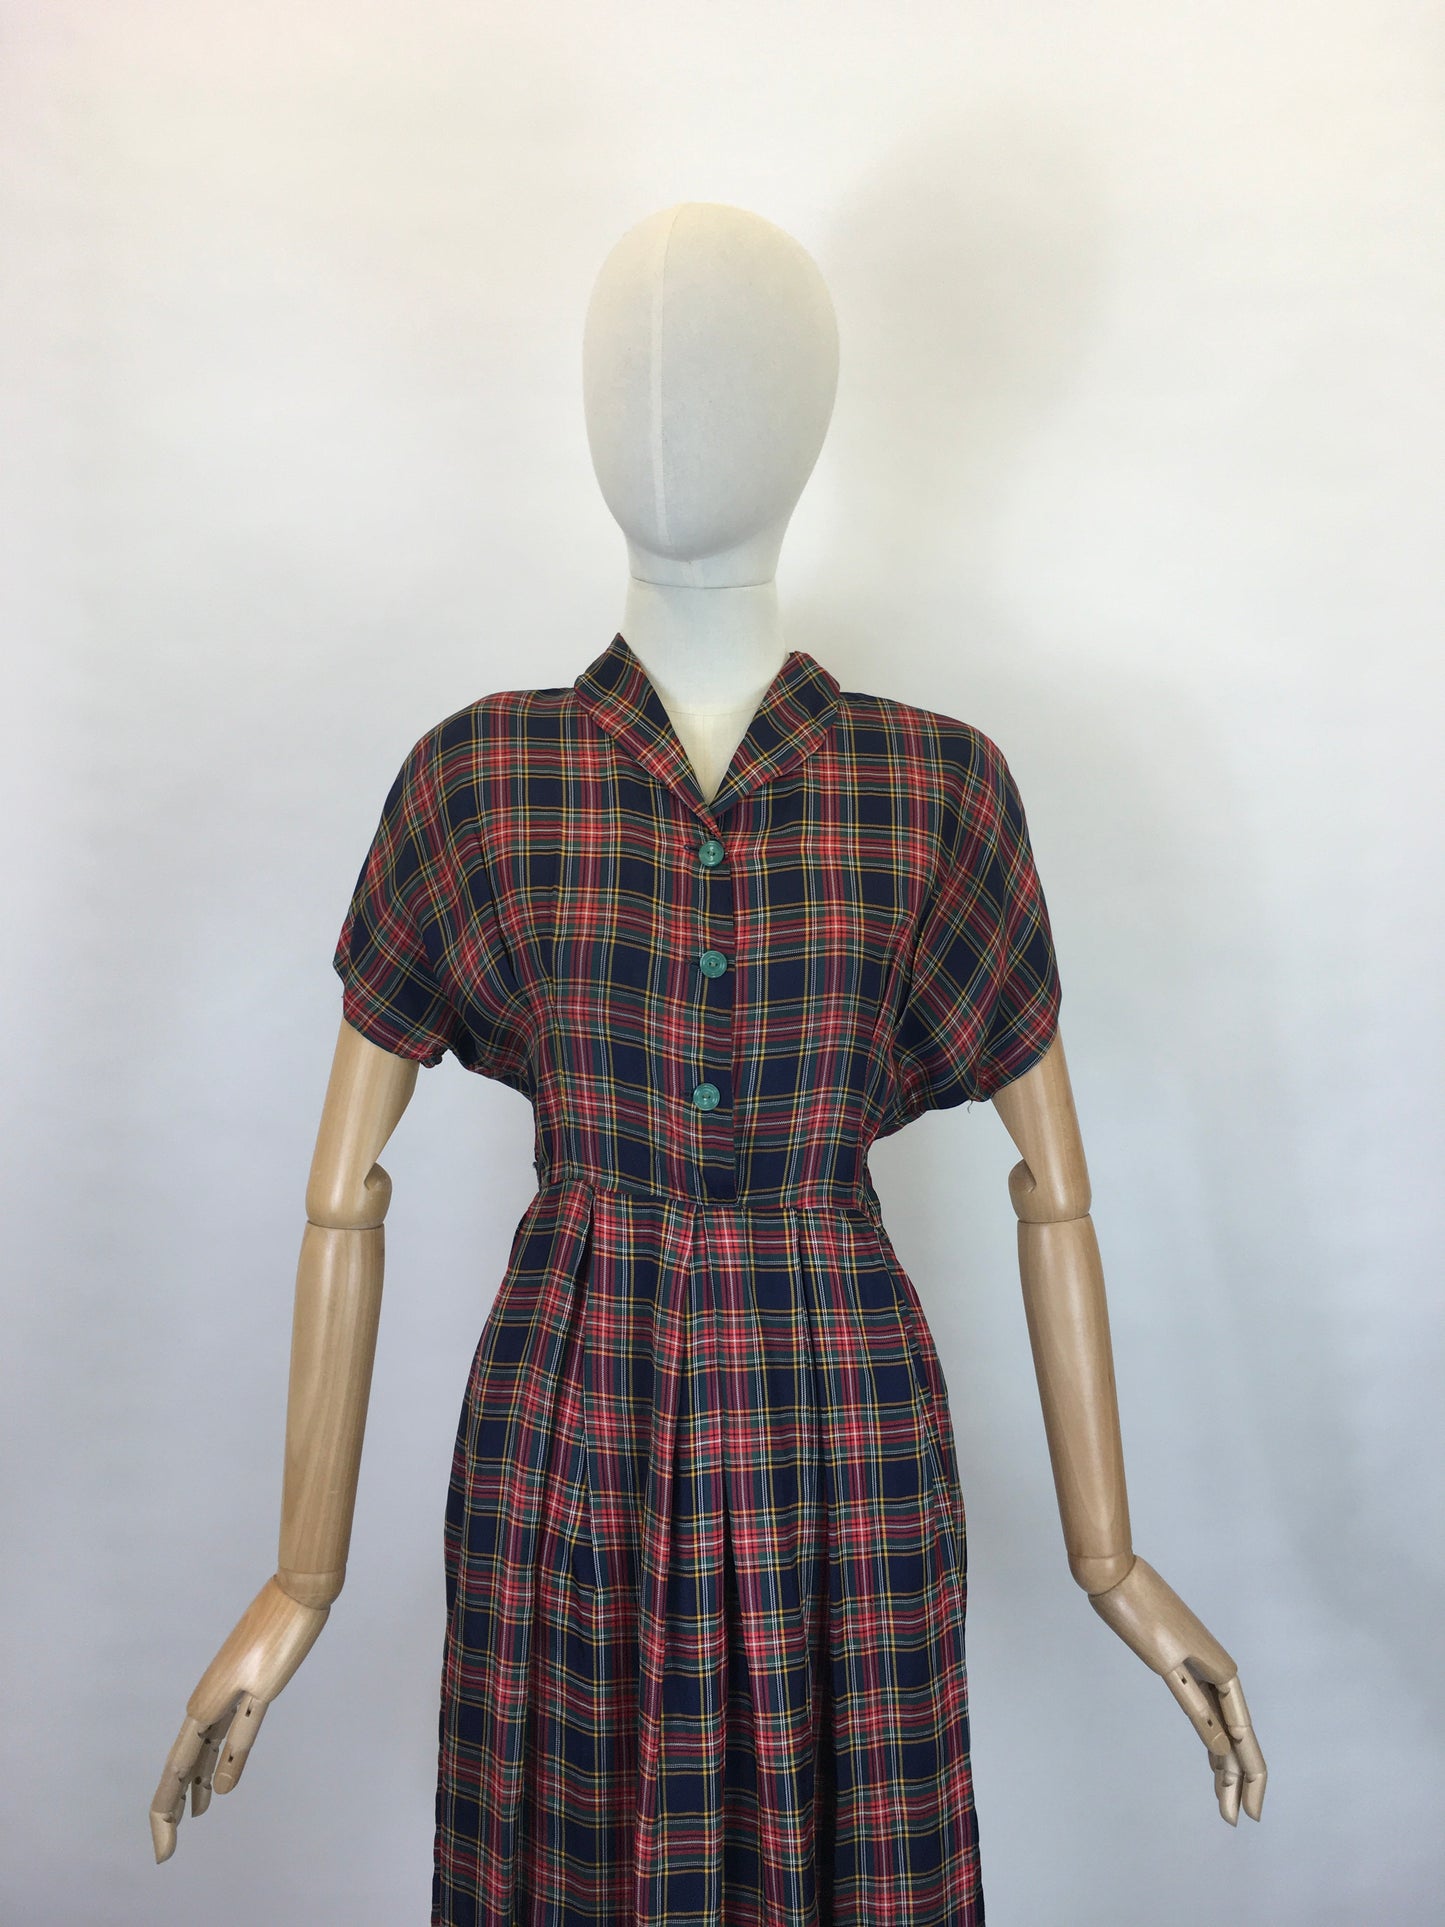 Original 1940’s Plaid Dress - In Rich Blues, Burgundy’s, Old Gold and Forest Greens